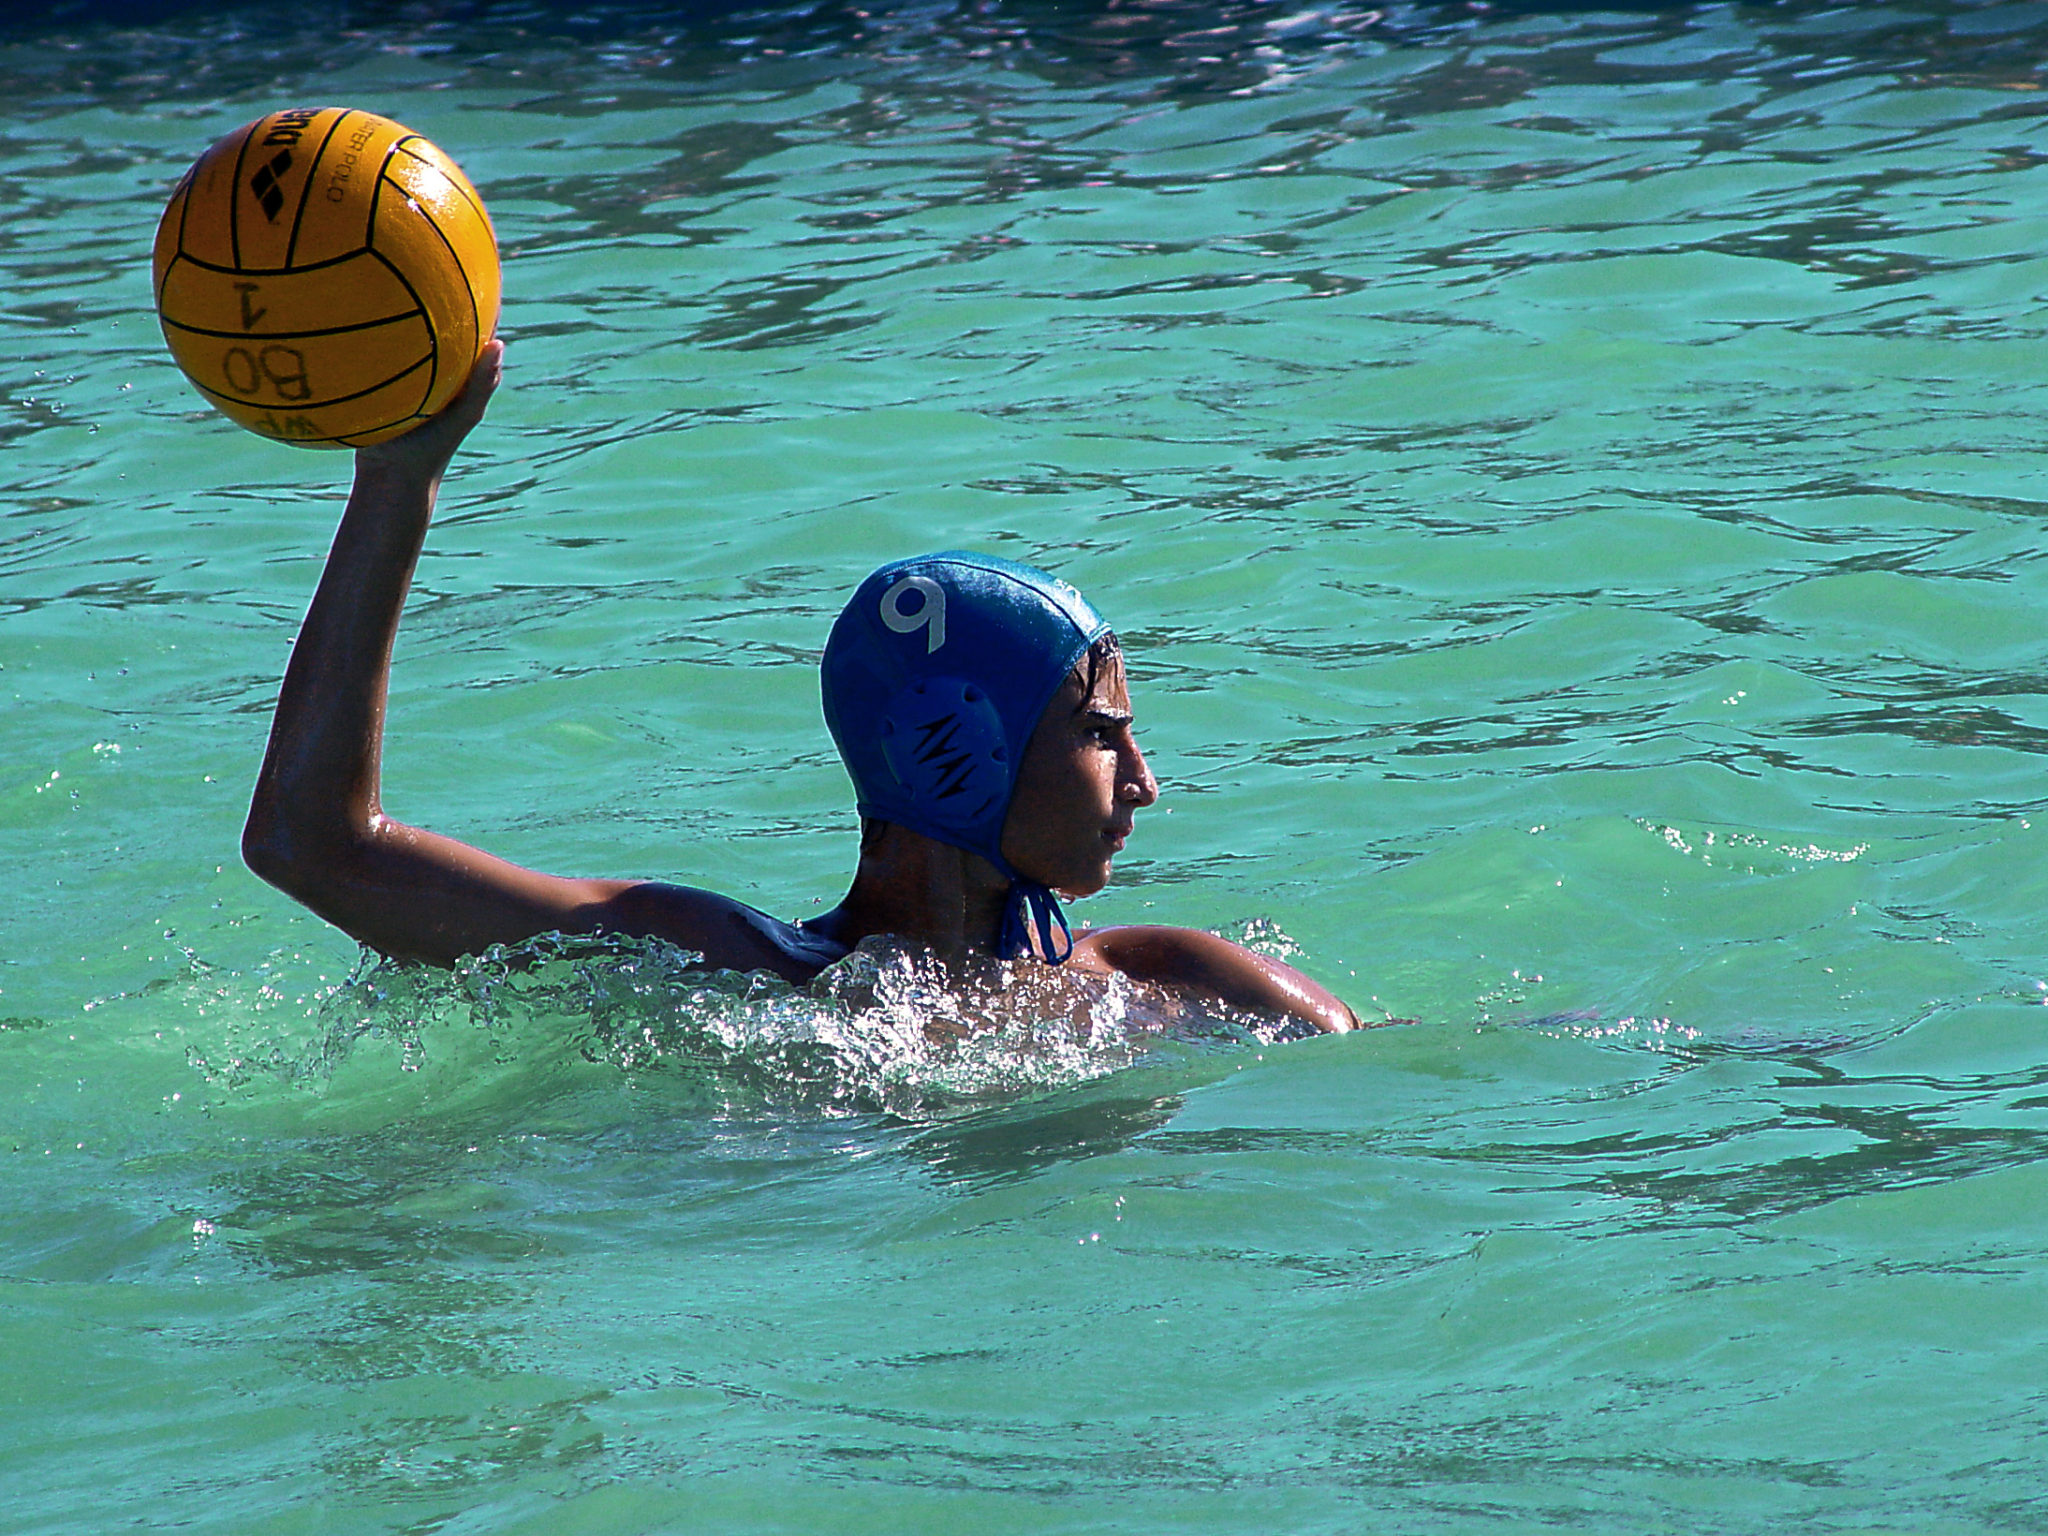 Water Polo Pre-Workout Warm-up